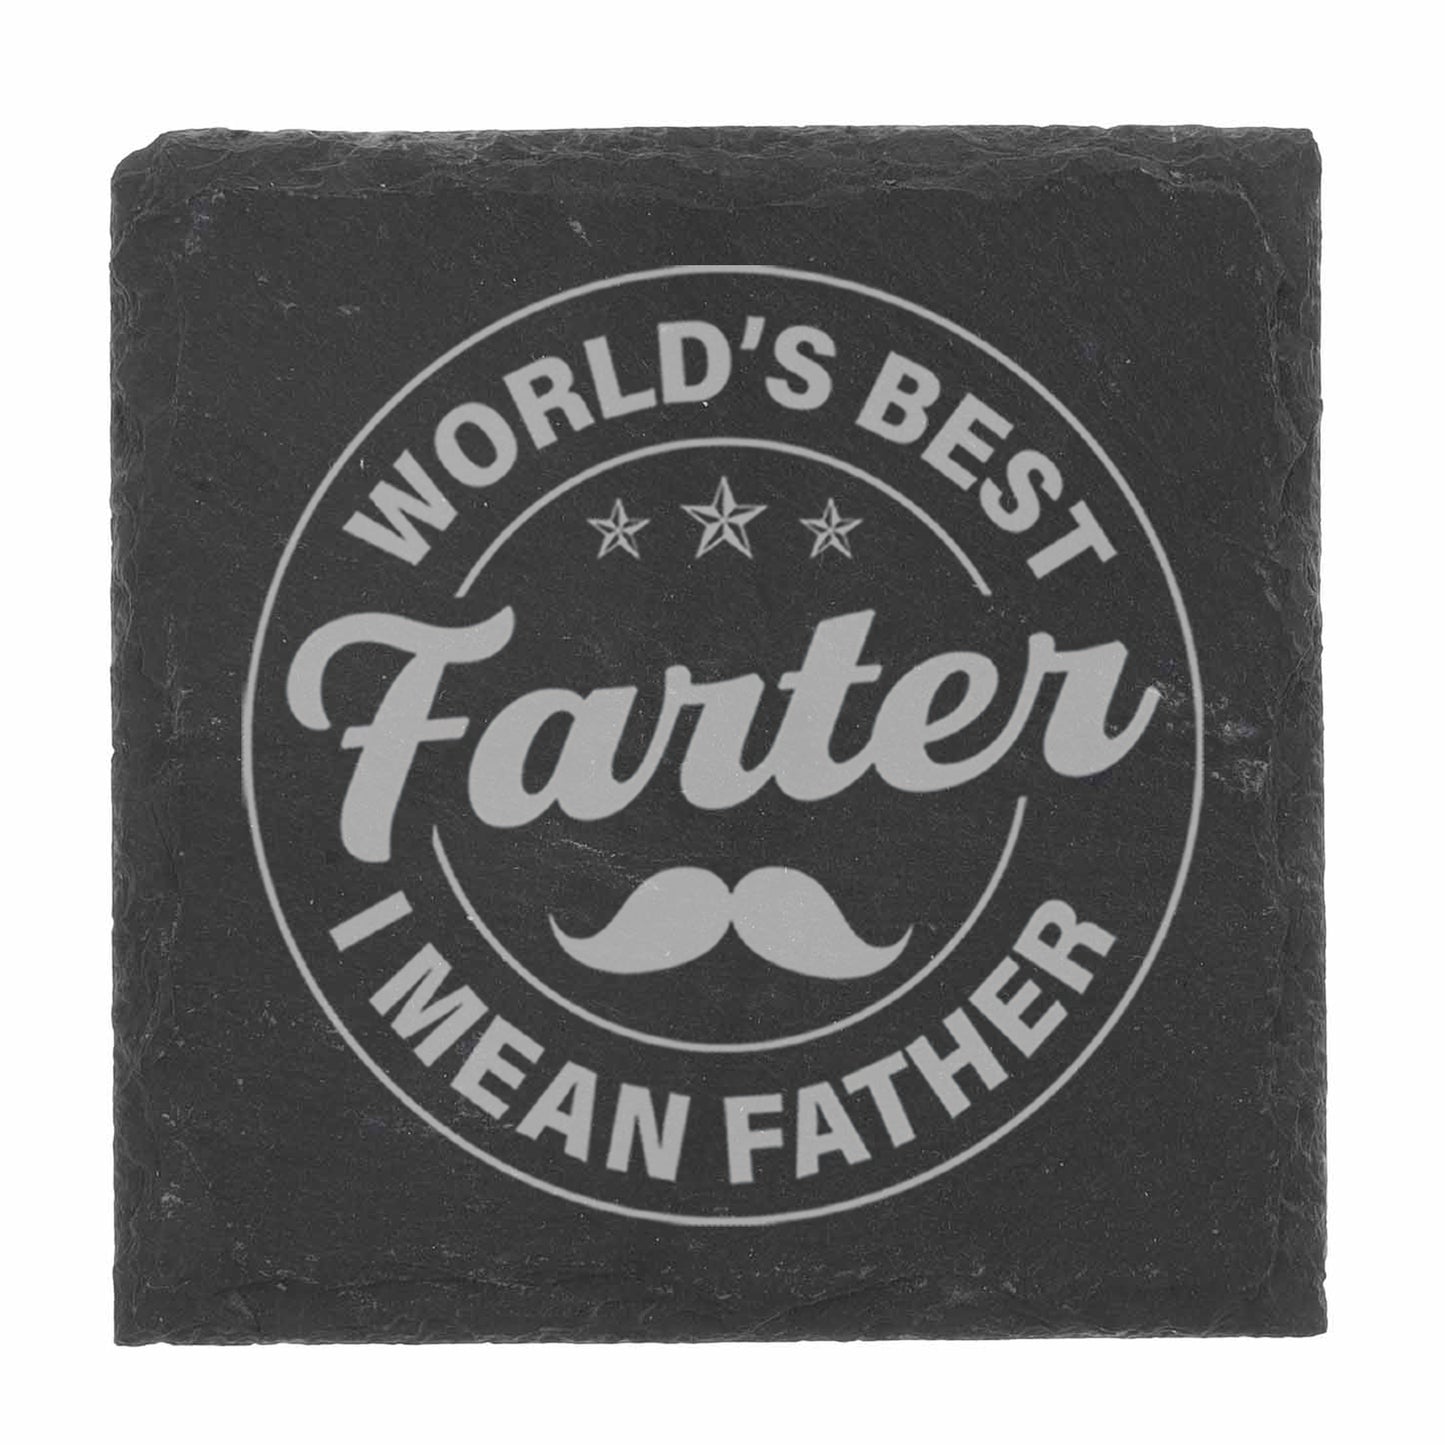 Worlds Best Farter I Mean Father Engraved Beer Glass and/or Coaster Set  - Always Looking Good - Circle Style Square Coaster Only  